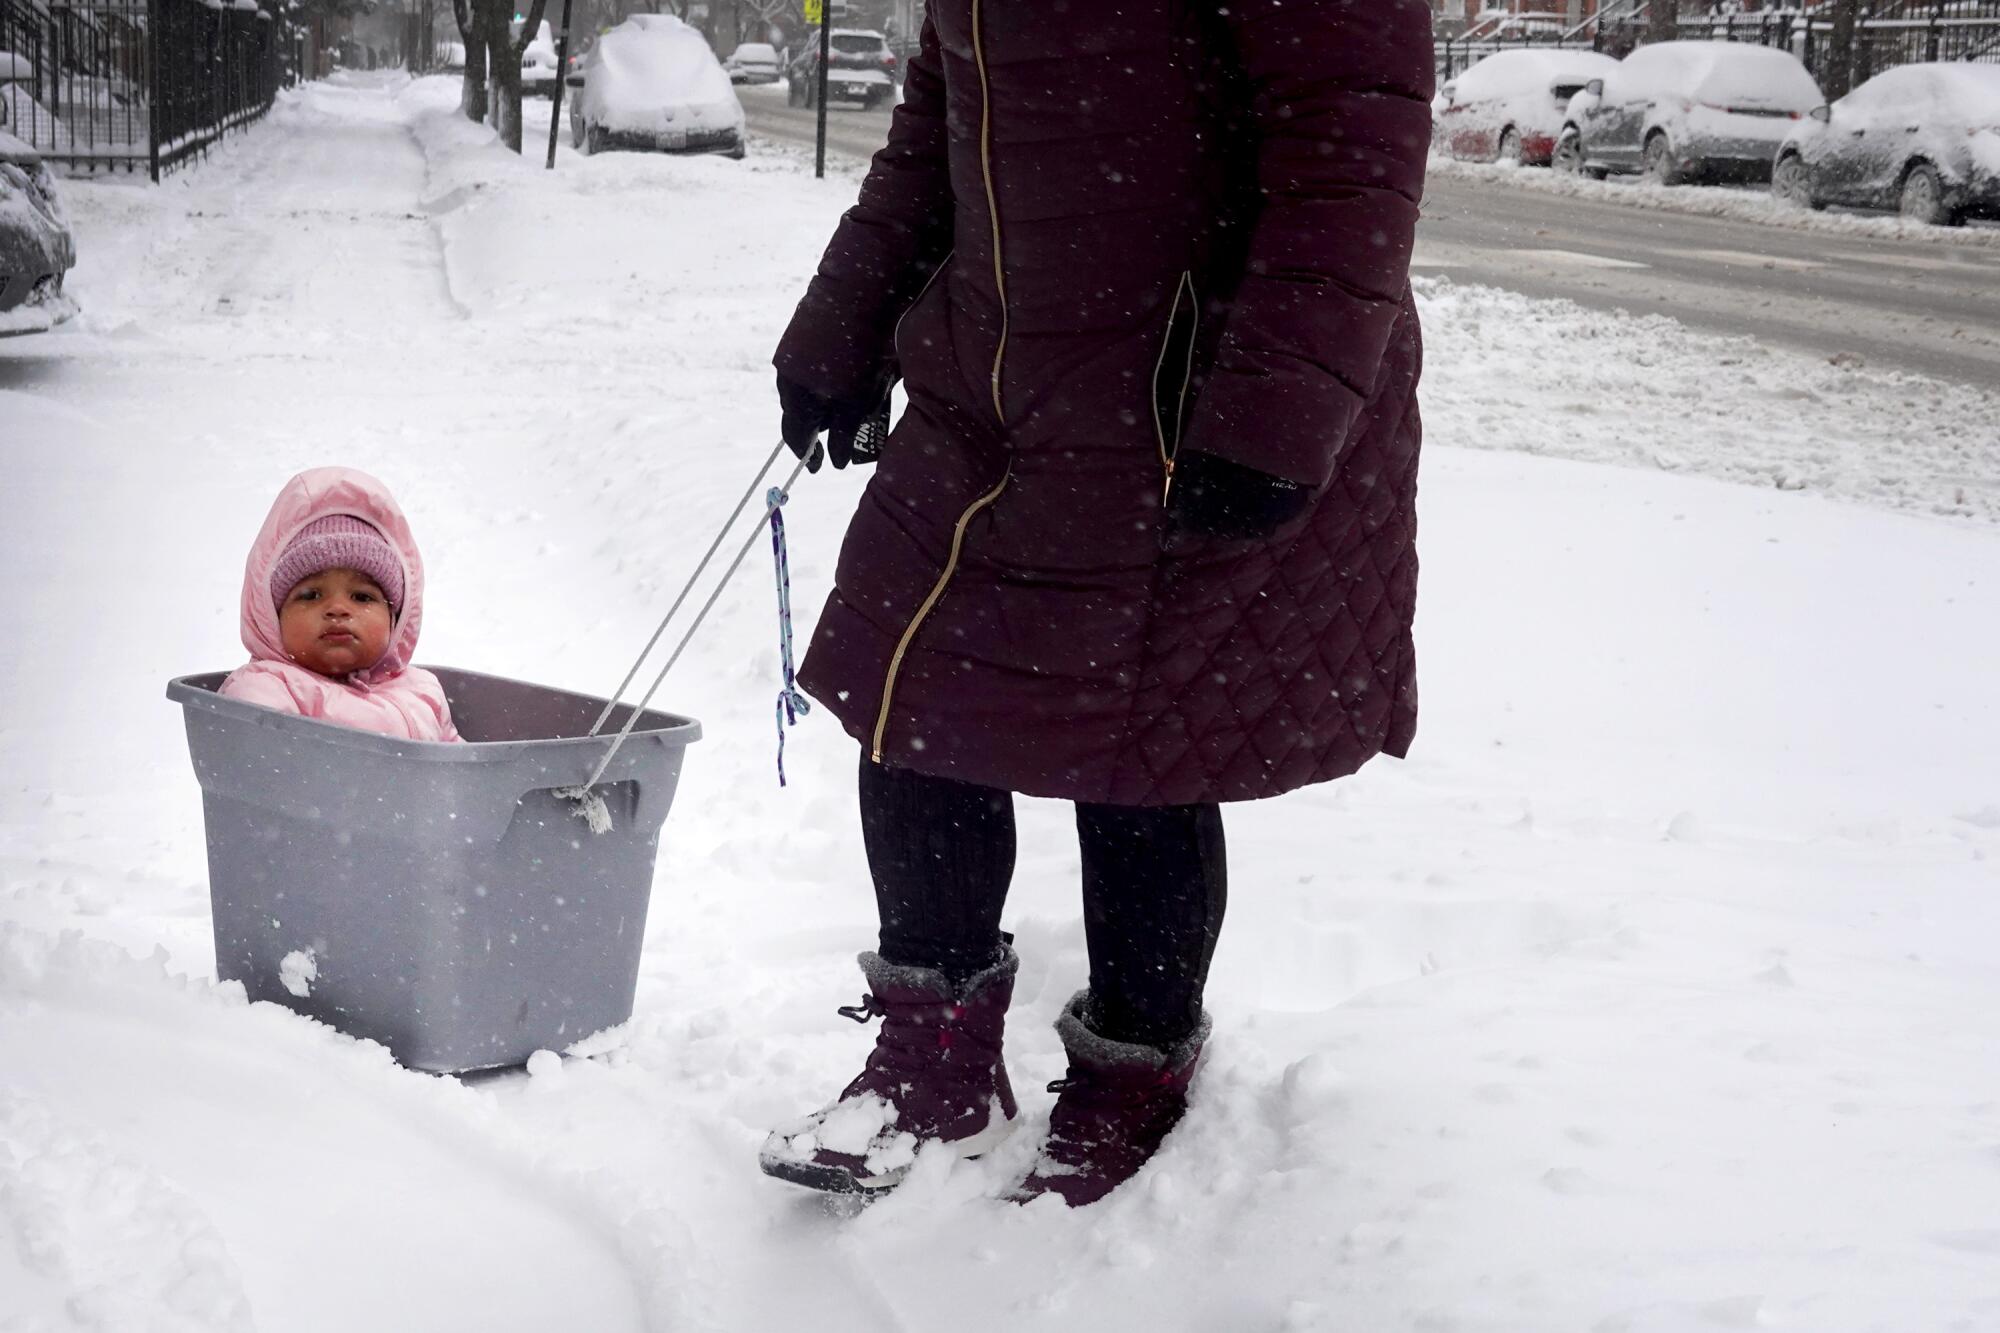 A baby is moved through snow in a plastic container